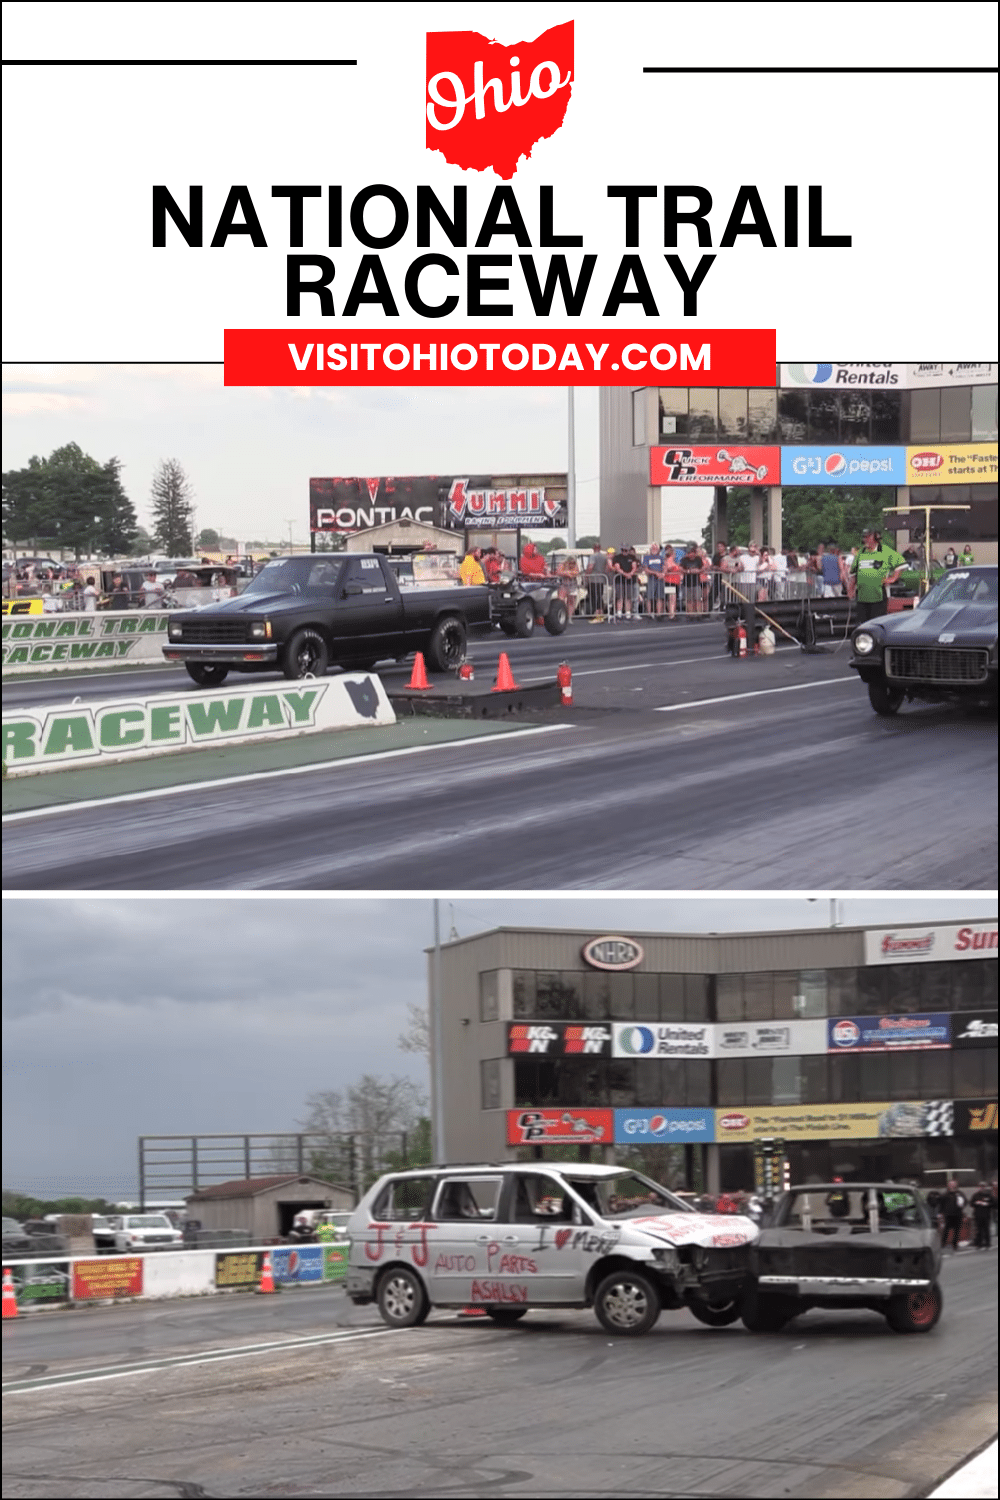 National Trail Raceway is based between the Ohio Cities of Kirkersville and Hebron. Here you can enjoy drag racing, hot rod racing, stock car racing, as well as motorcycle racing, and much more. 